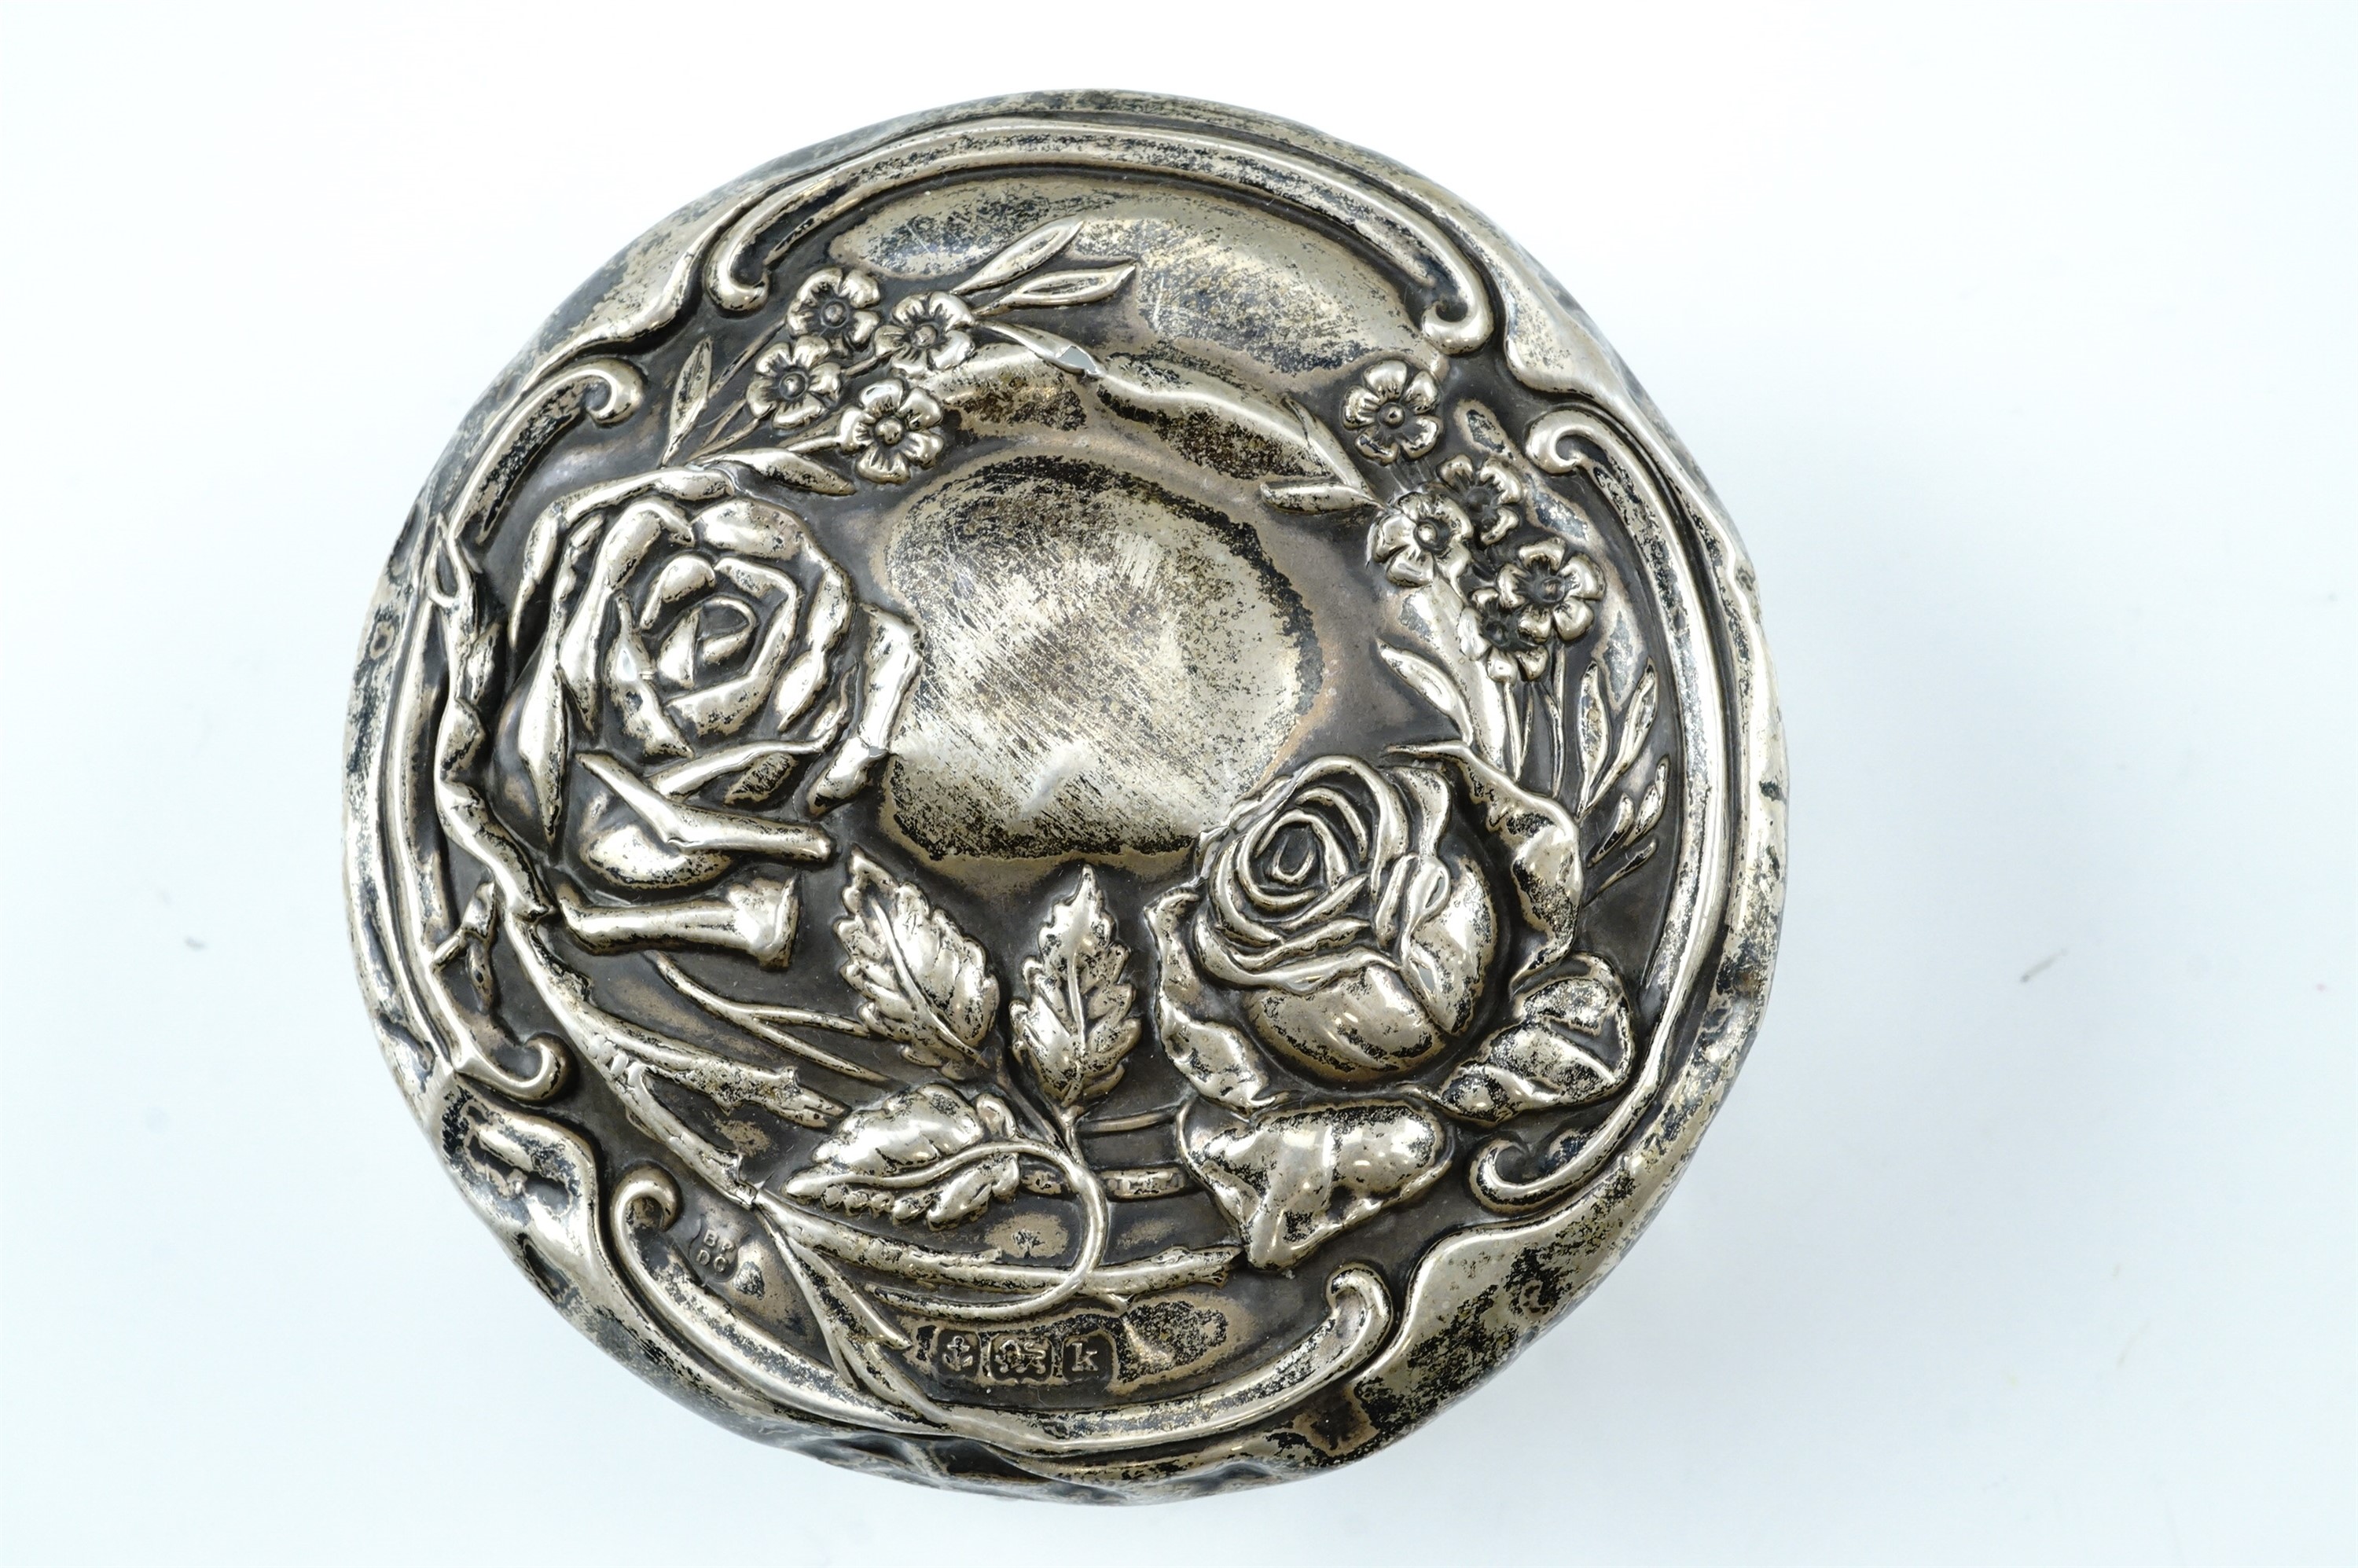 A silver-lidded cut glass dressing table tidy, the cover relief decorated in depiction of roses - Image 3 of 4